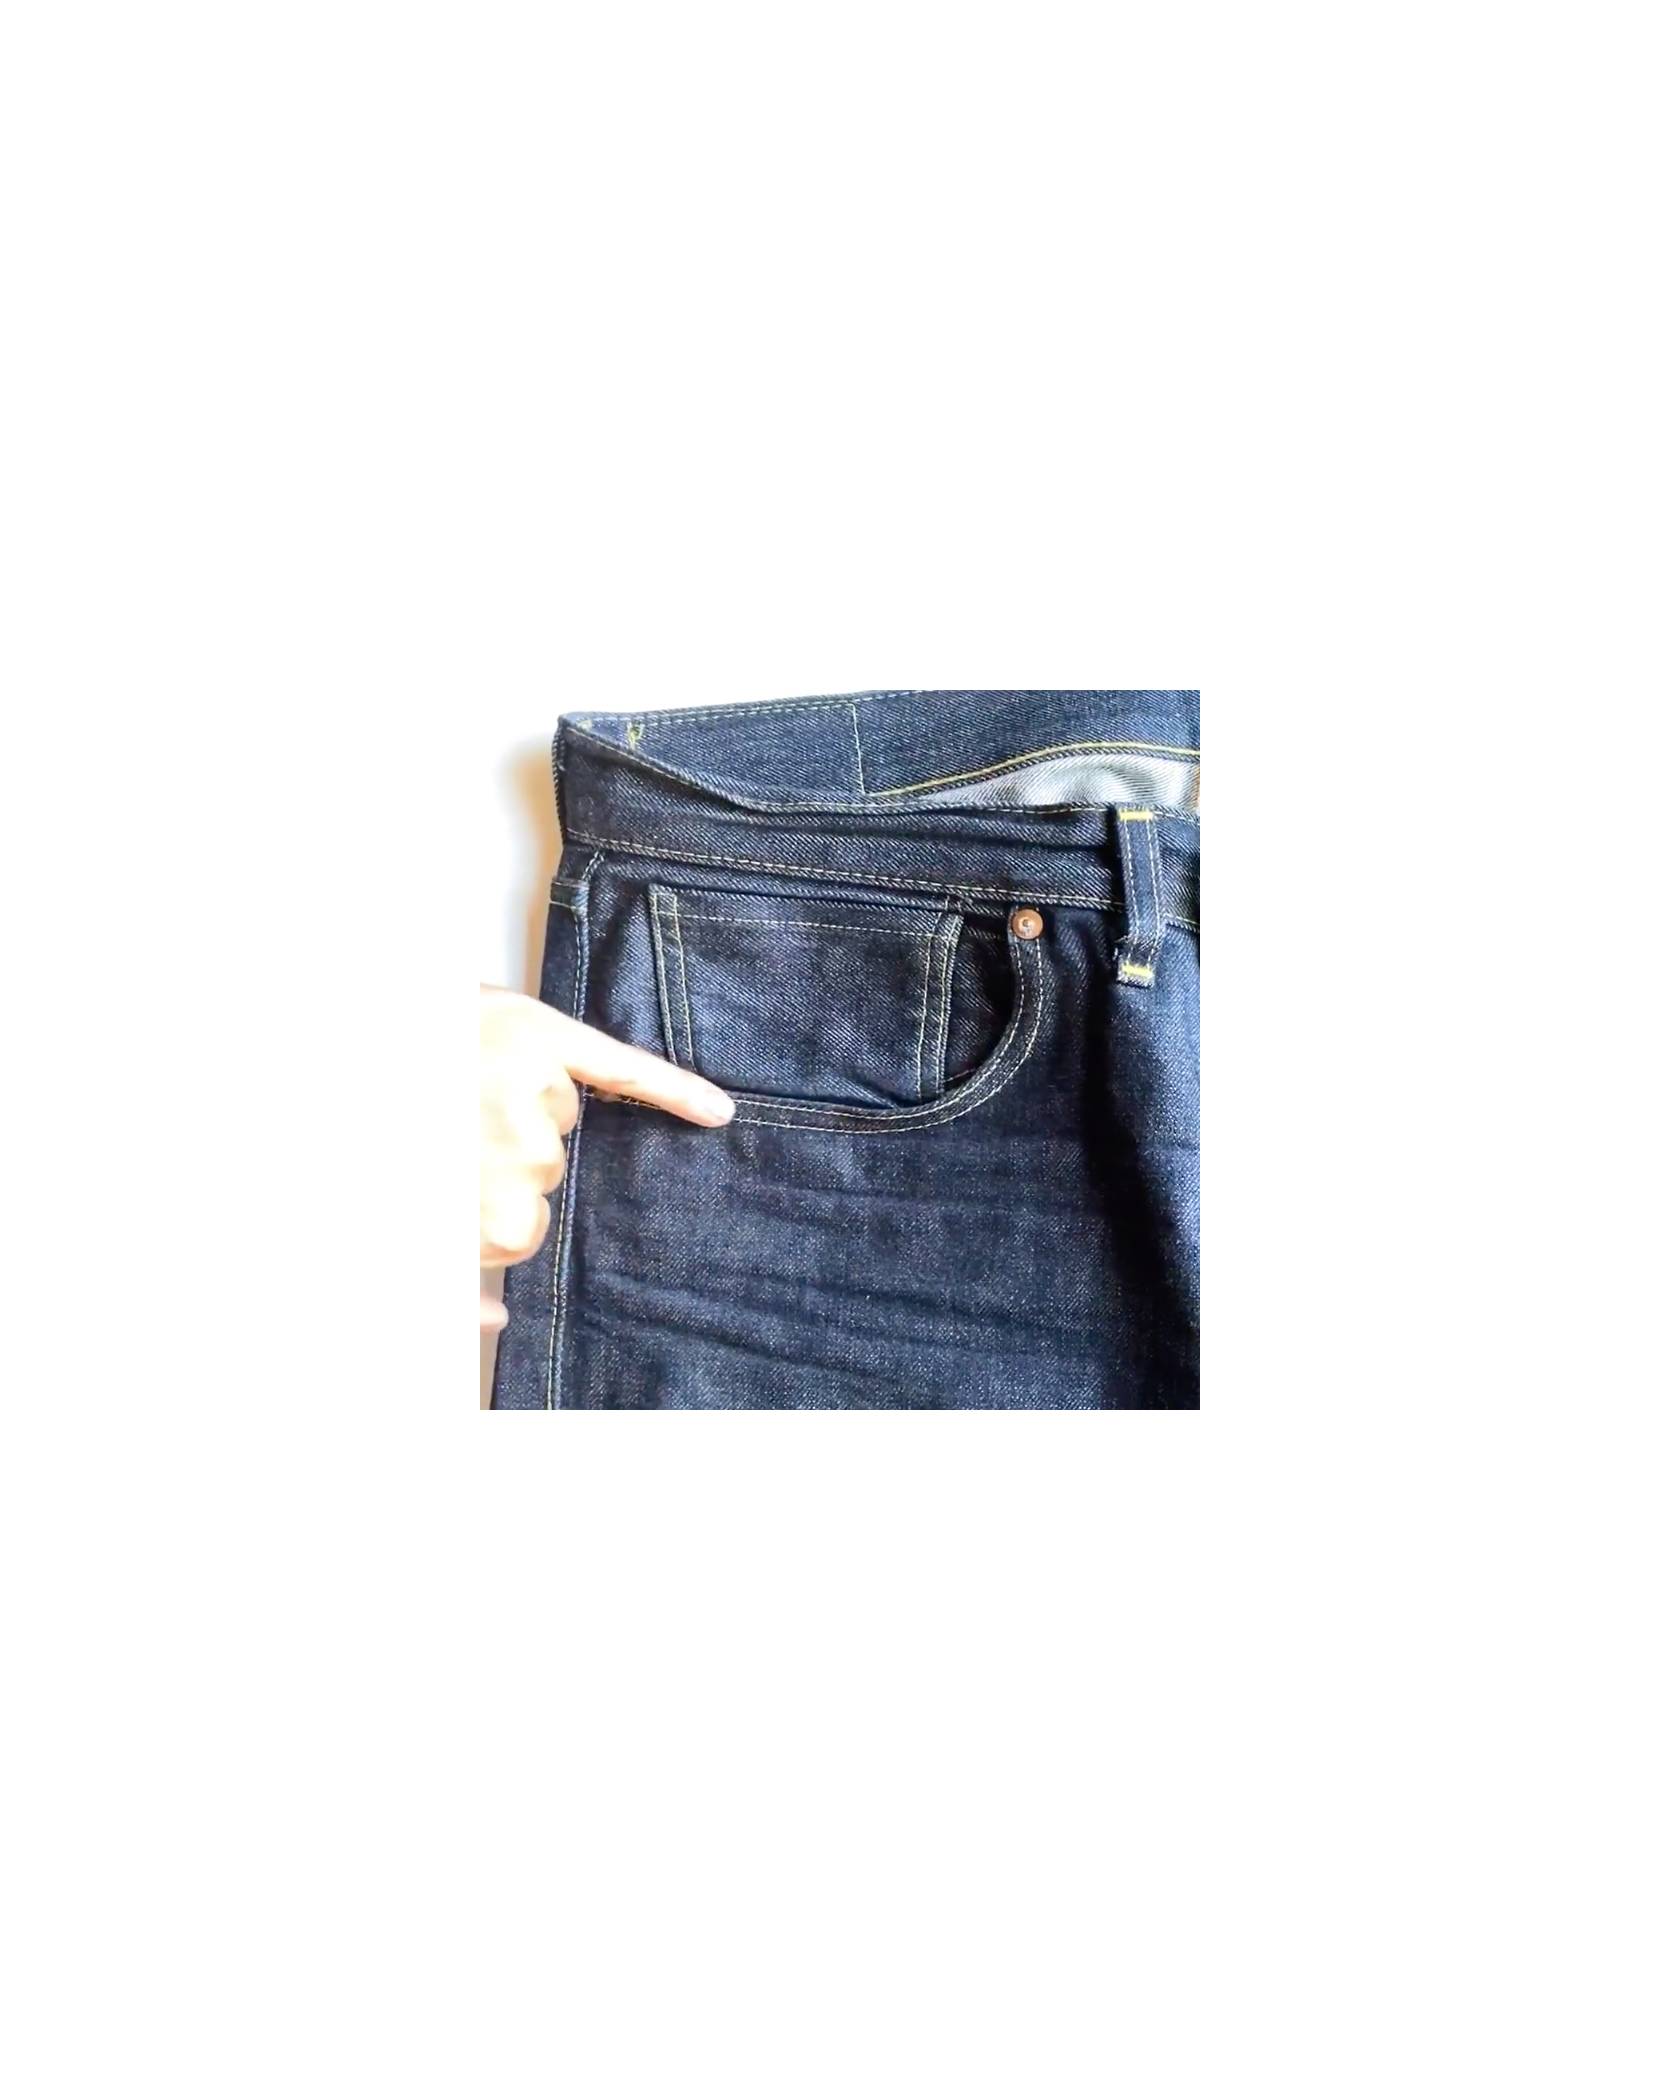 How to Hem Jeans: A Complete Guide with Pictures and Videos